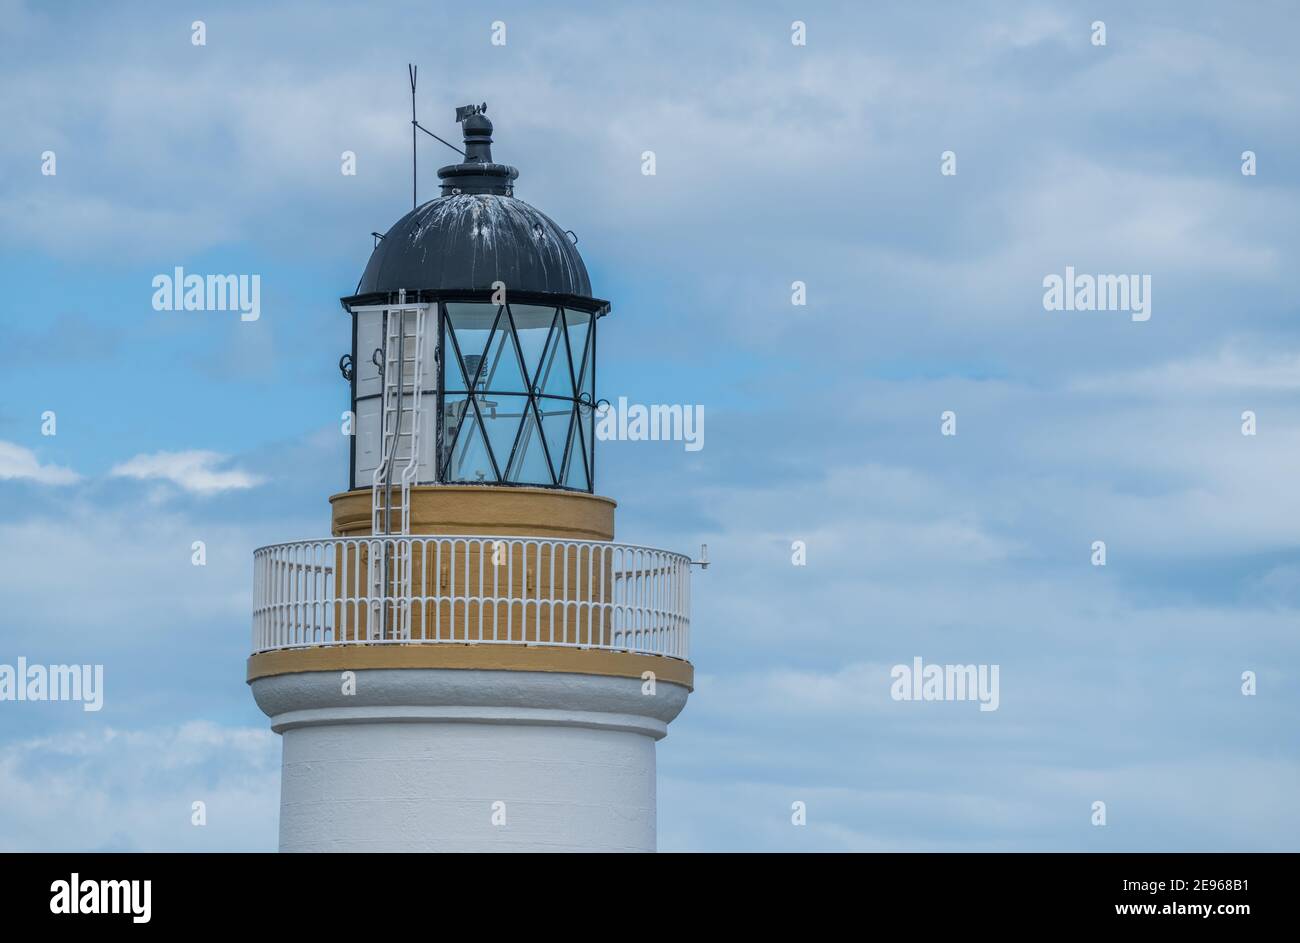 Chanonry Point Lighthouse, Moray Firth, Schottland Stockfoto